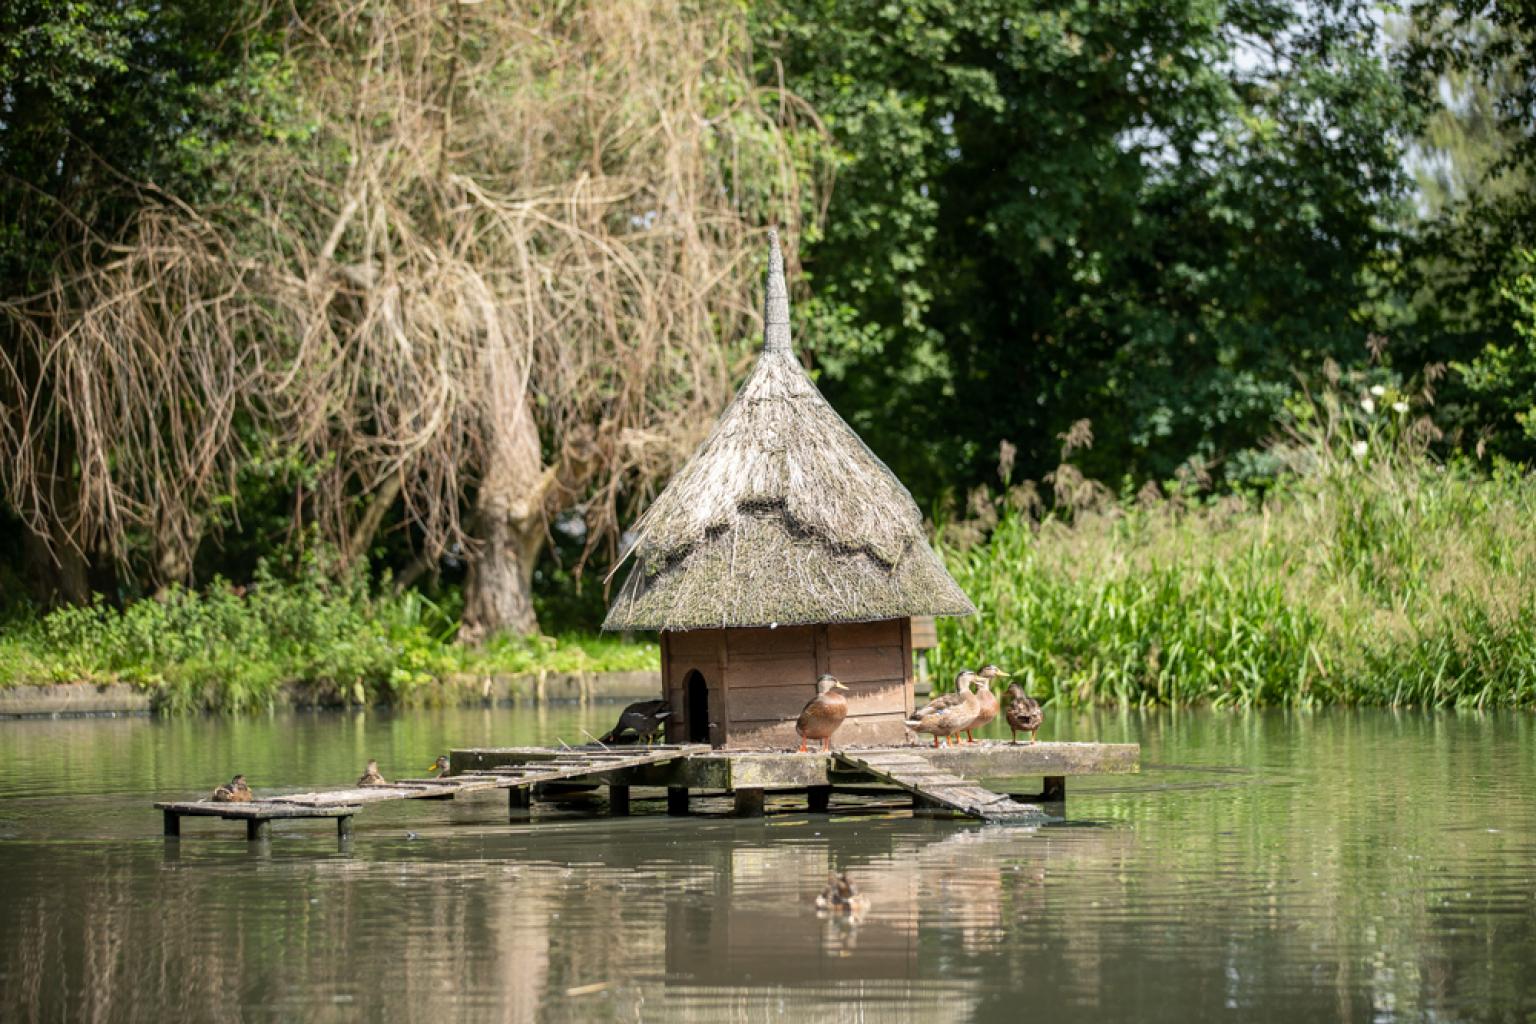 Duck house in middle of pond